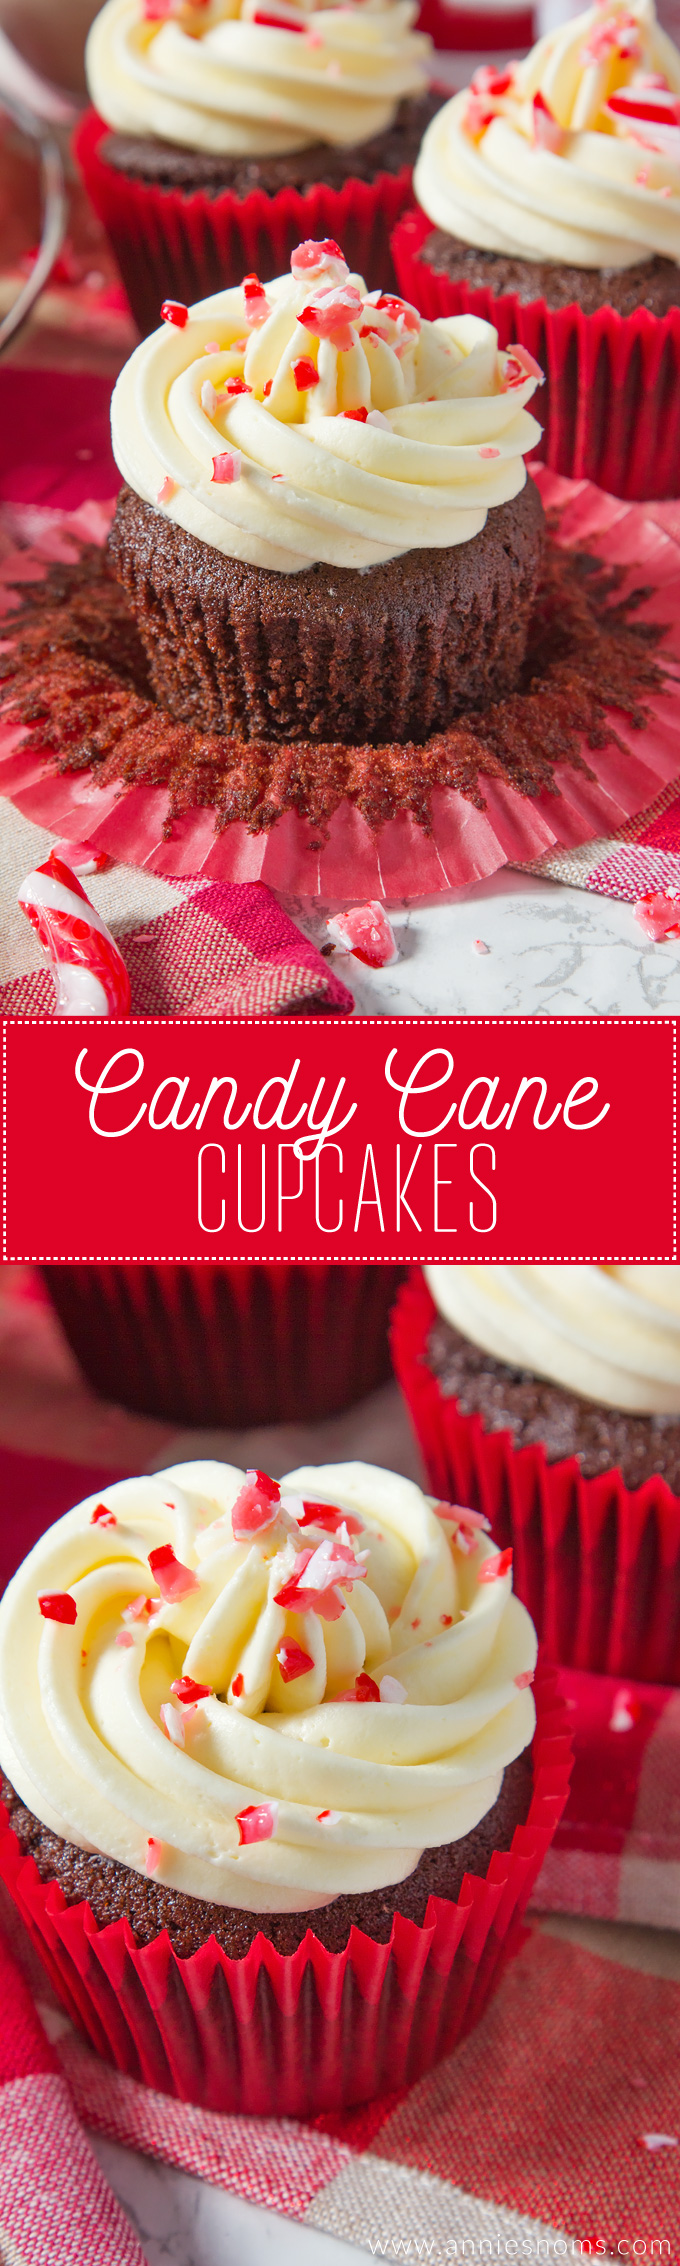 A soft, rich chocolate and peppermint cupcake is topped with smooth, peppermint frosting and finished off with crushed candy canes, creating a fun, festive cupcake!